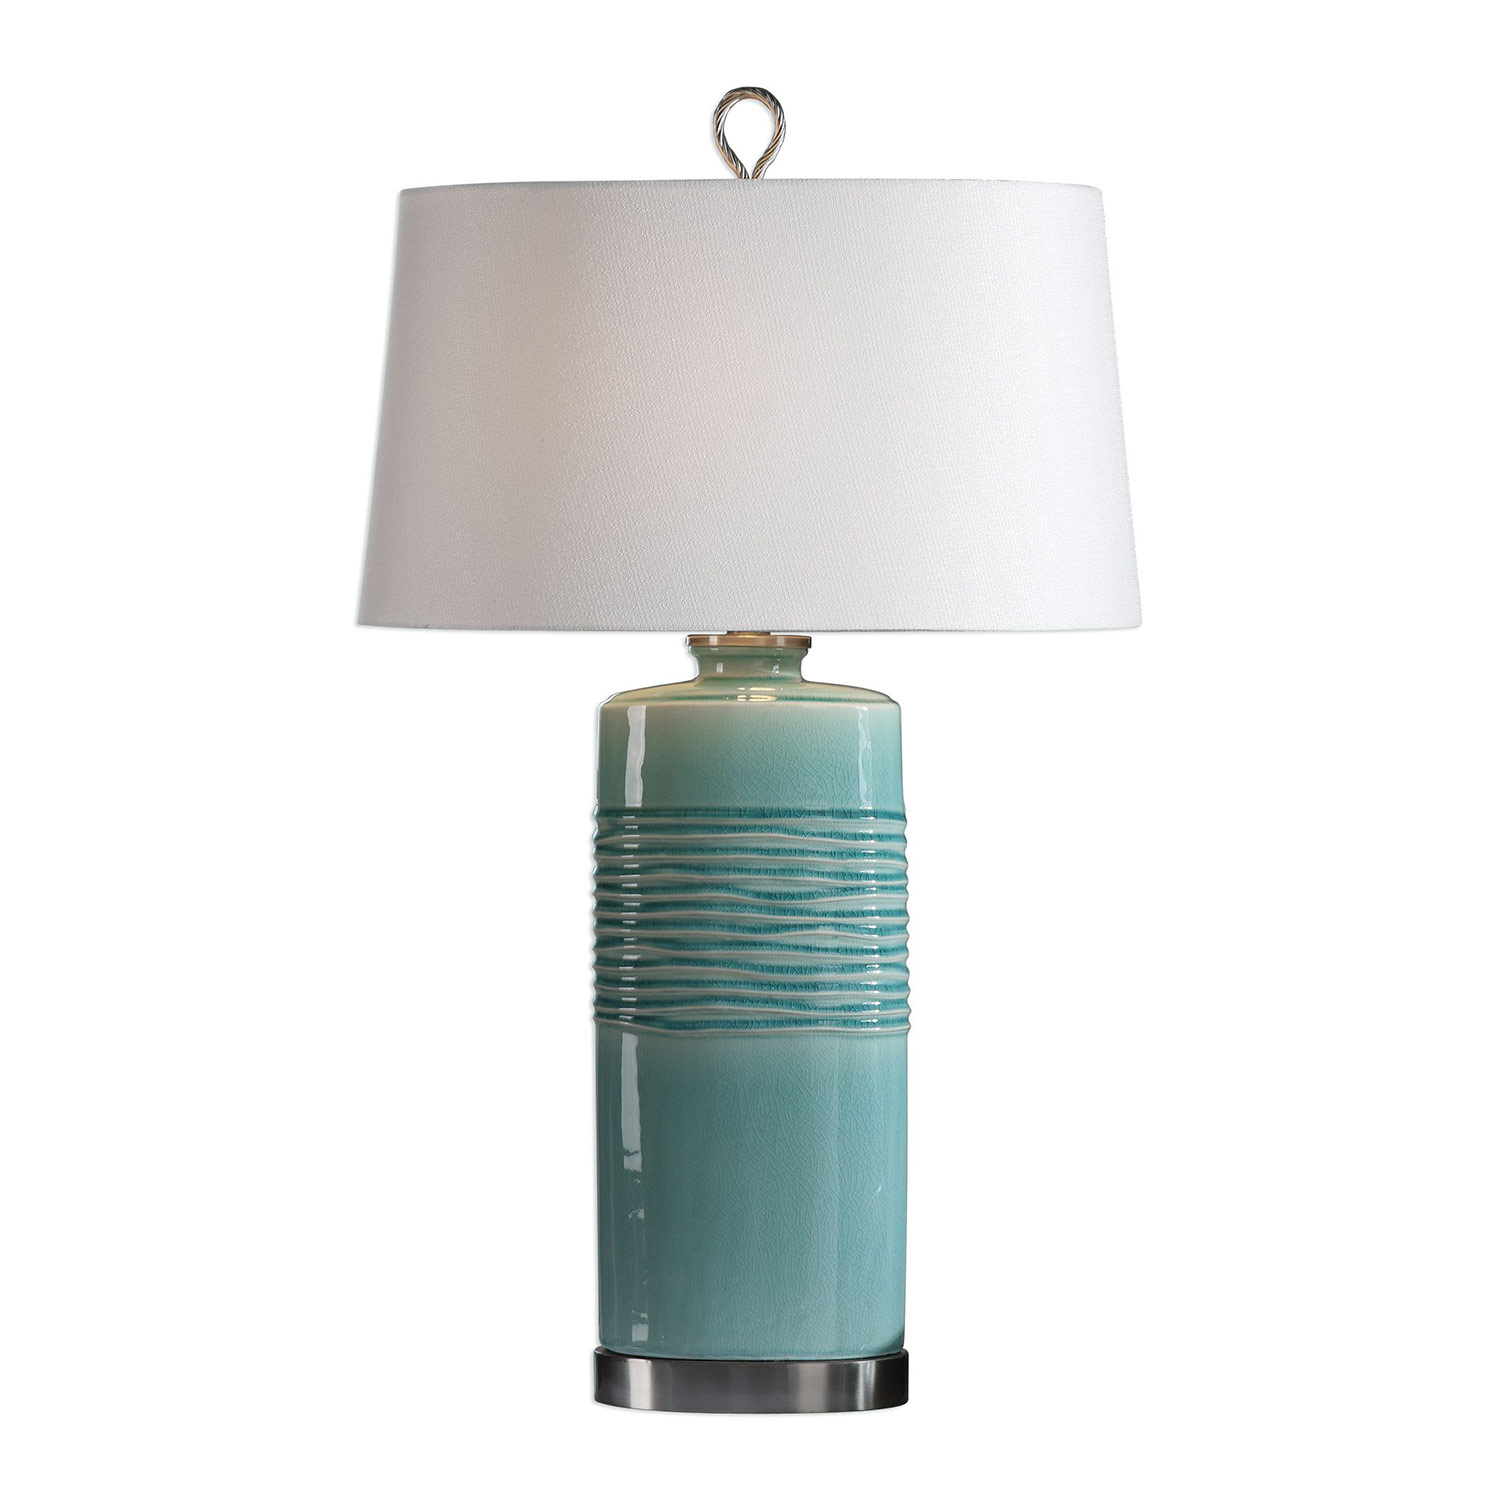 Uttermost Rila Table Lamp - Distressed Teal